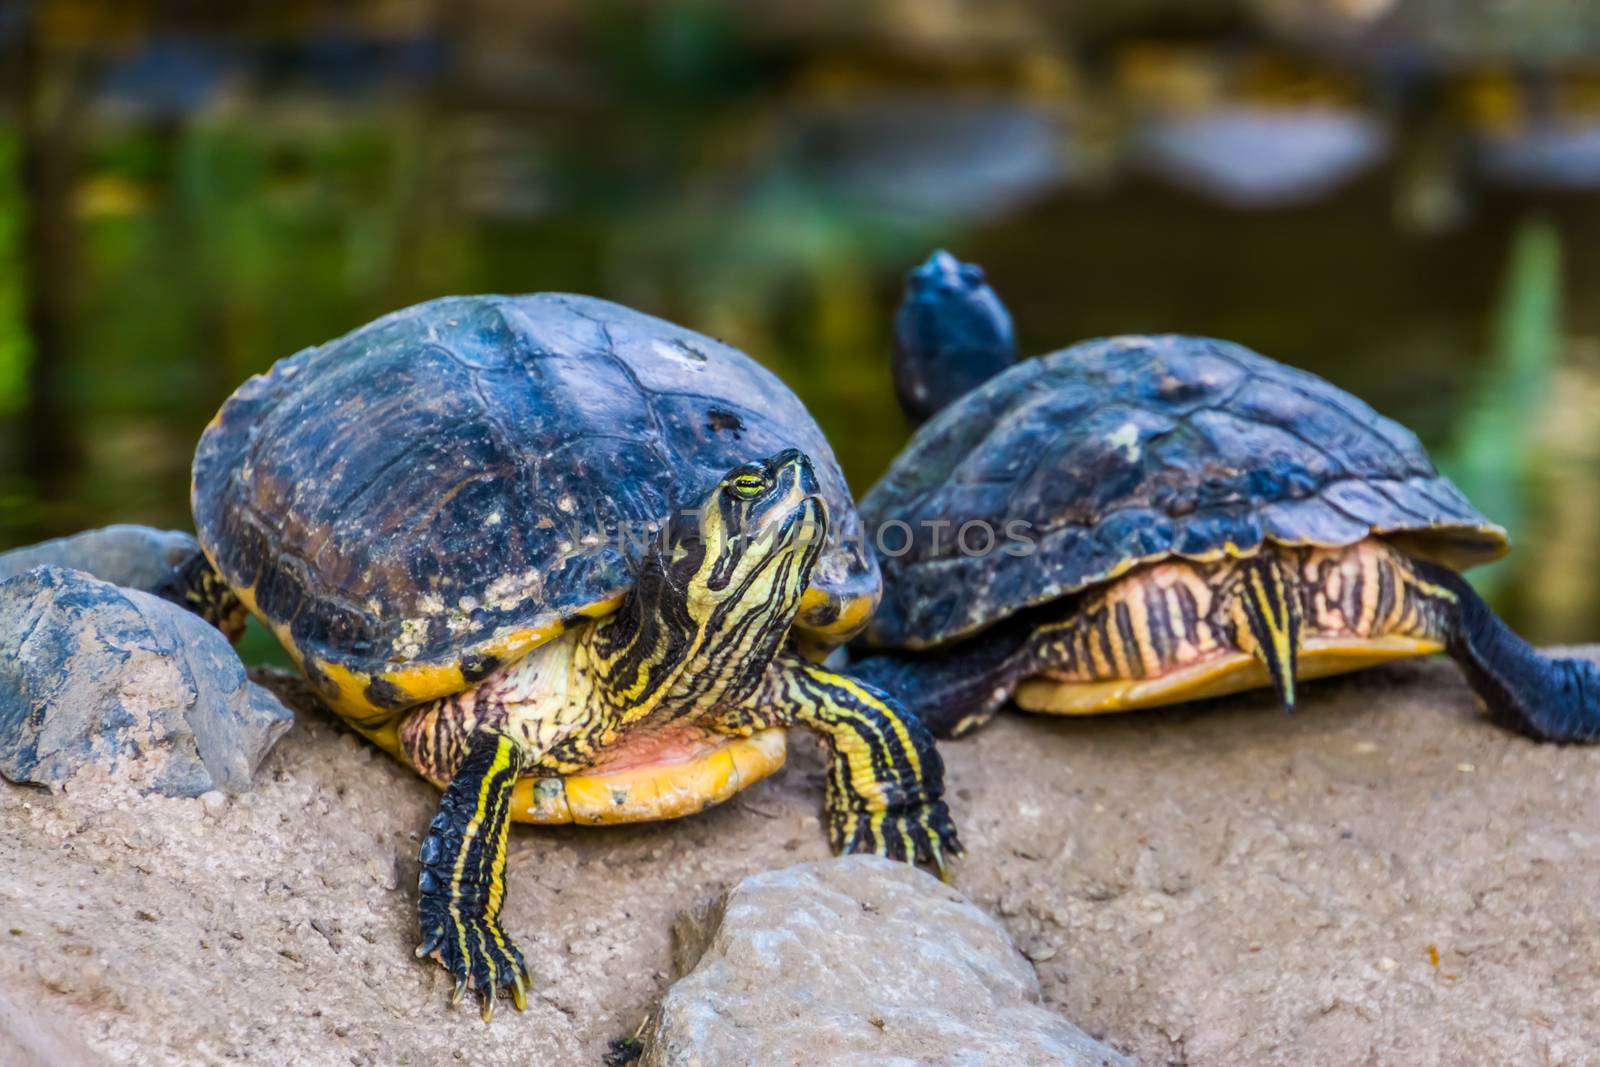 couple of yellow bellied cumberland slider turtles at the shore, front and rear view, tropical reptile specie from America